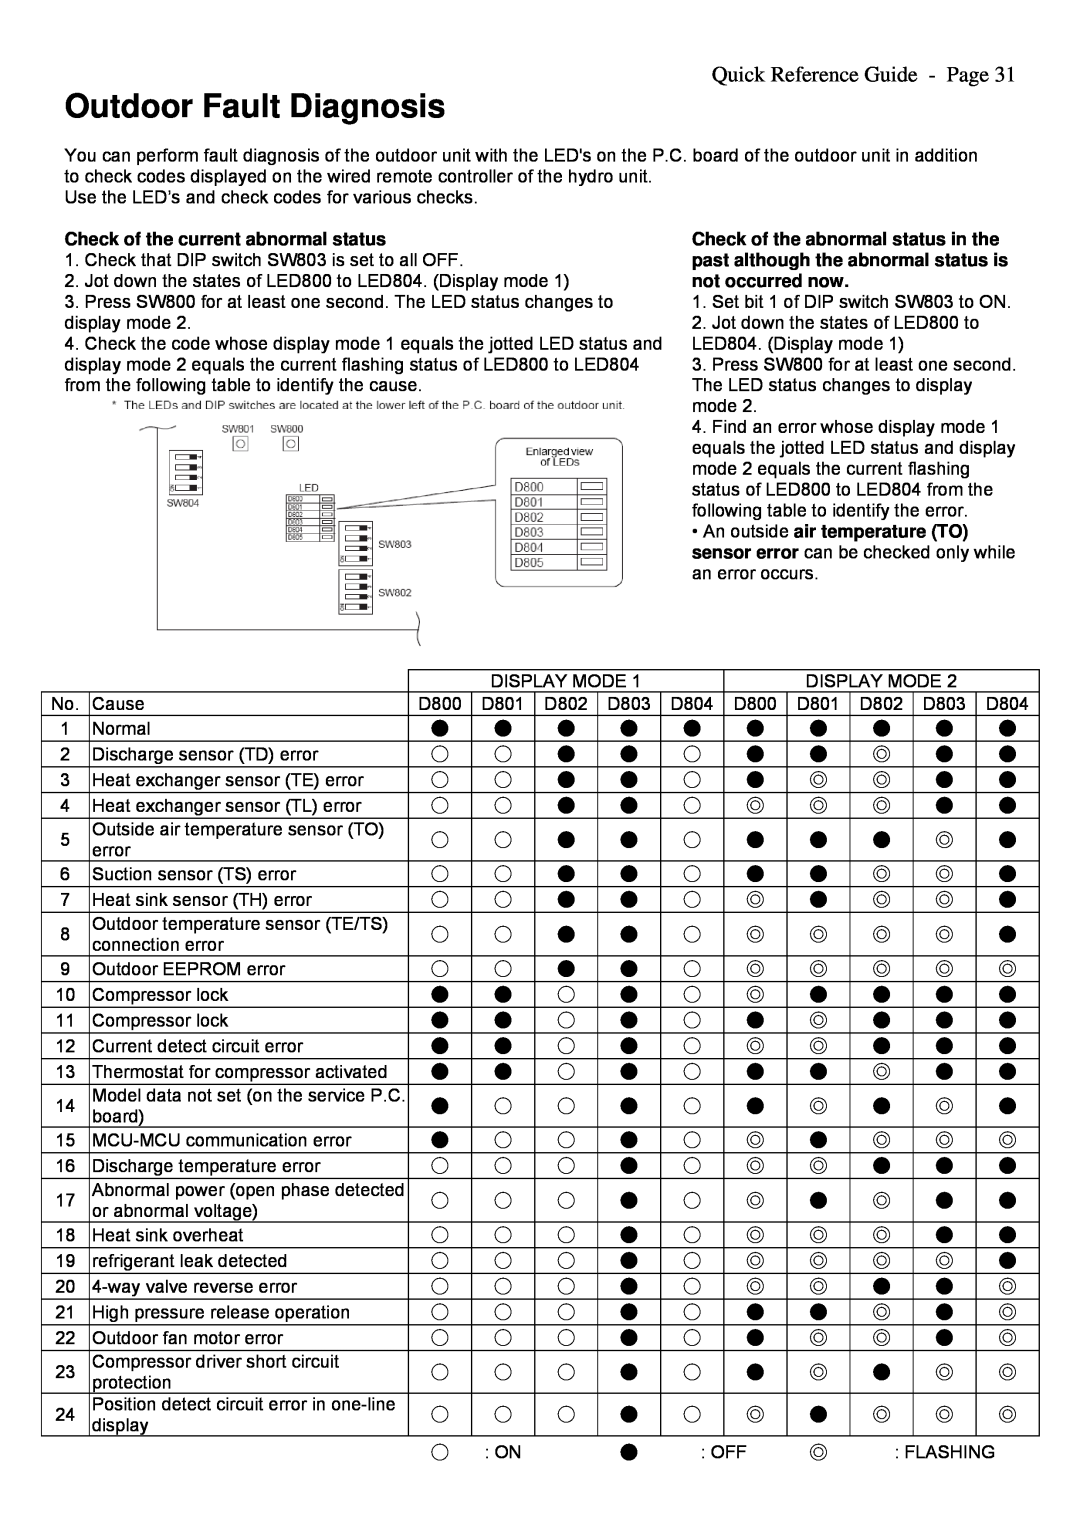 Toshiba A09-01P manual Outdoor Fault Diagnosis, Quick Reference Guide - Page 